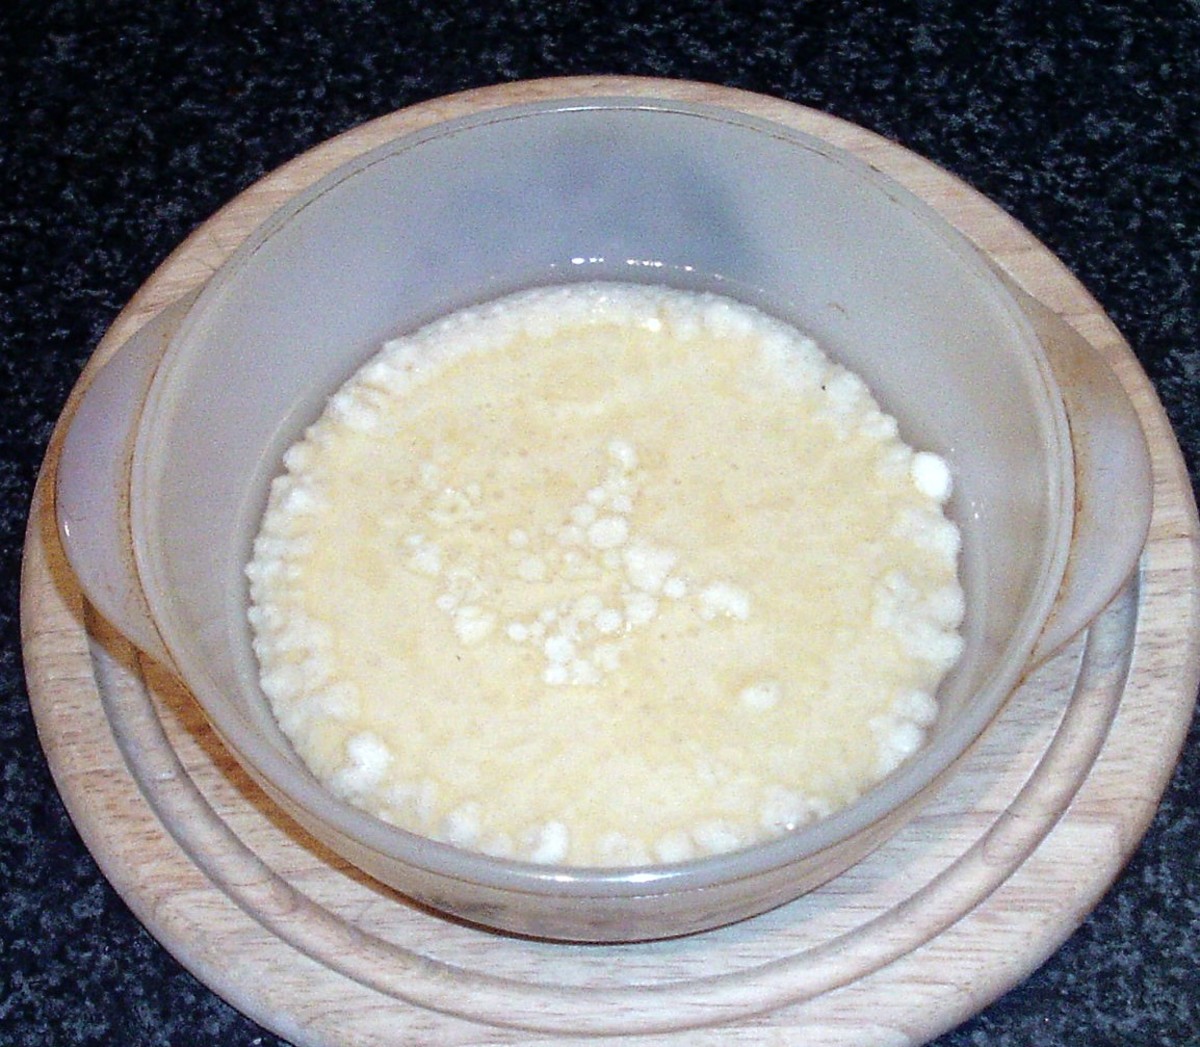 Pour Yorkshire pudding batter into hot oil